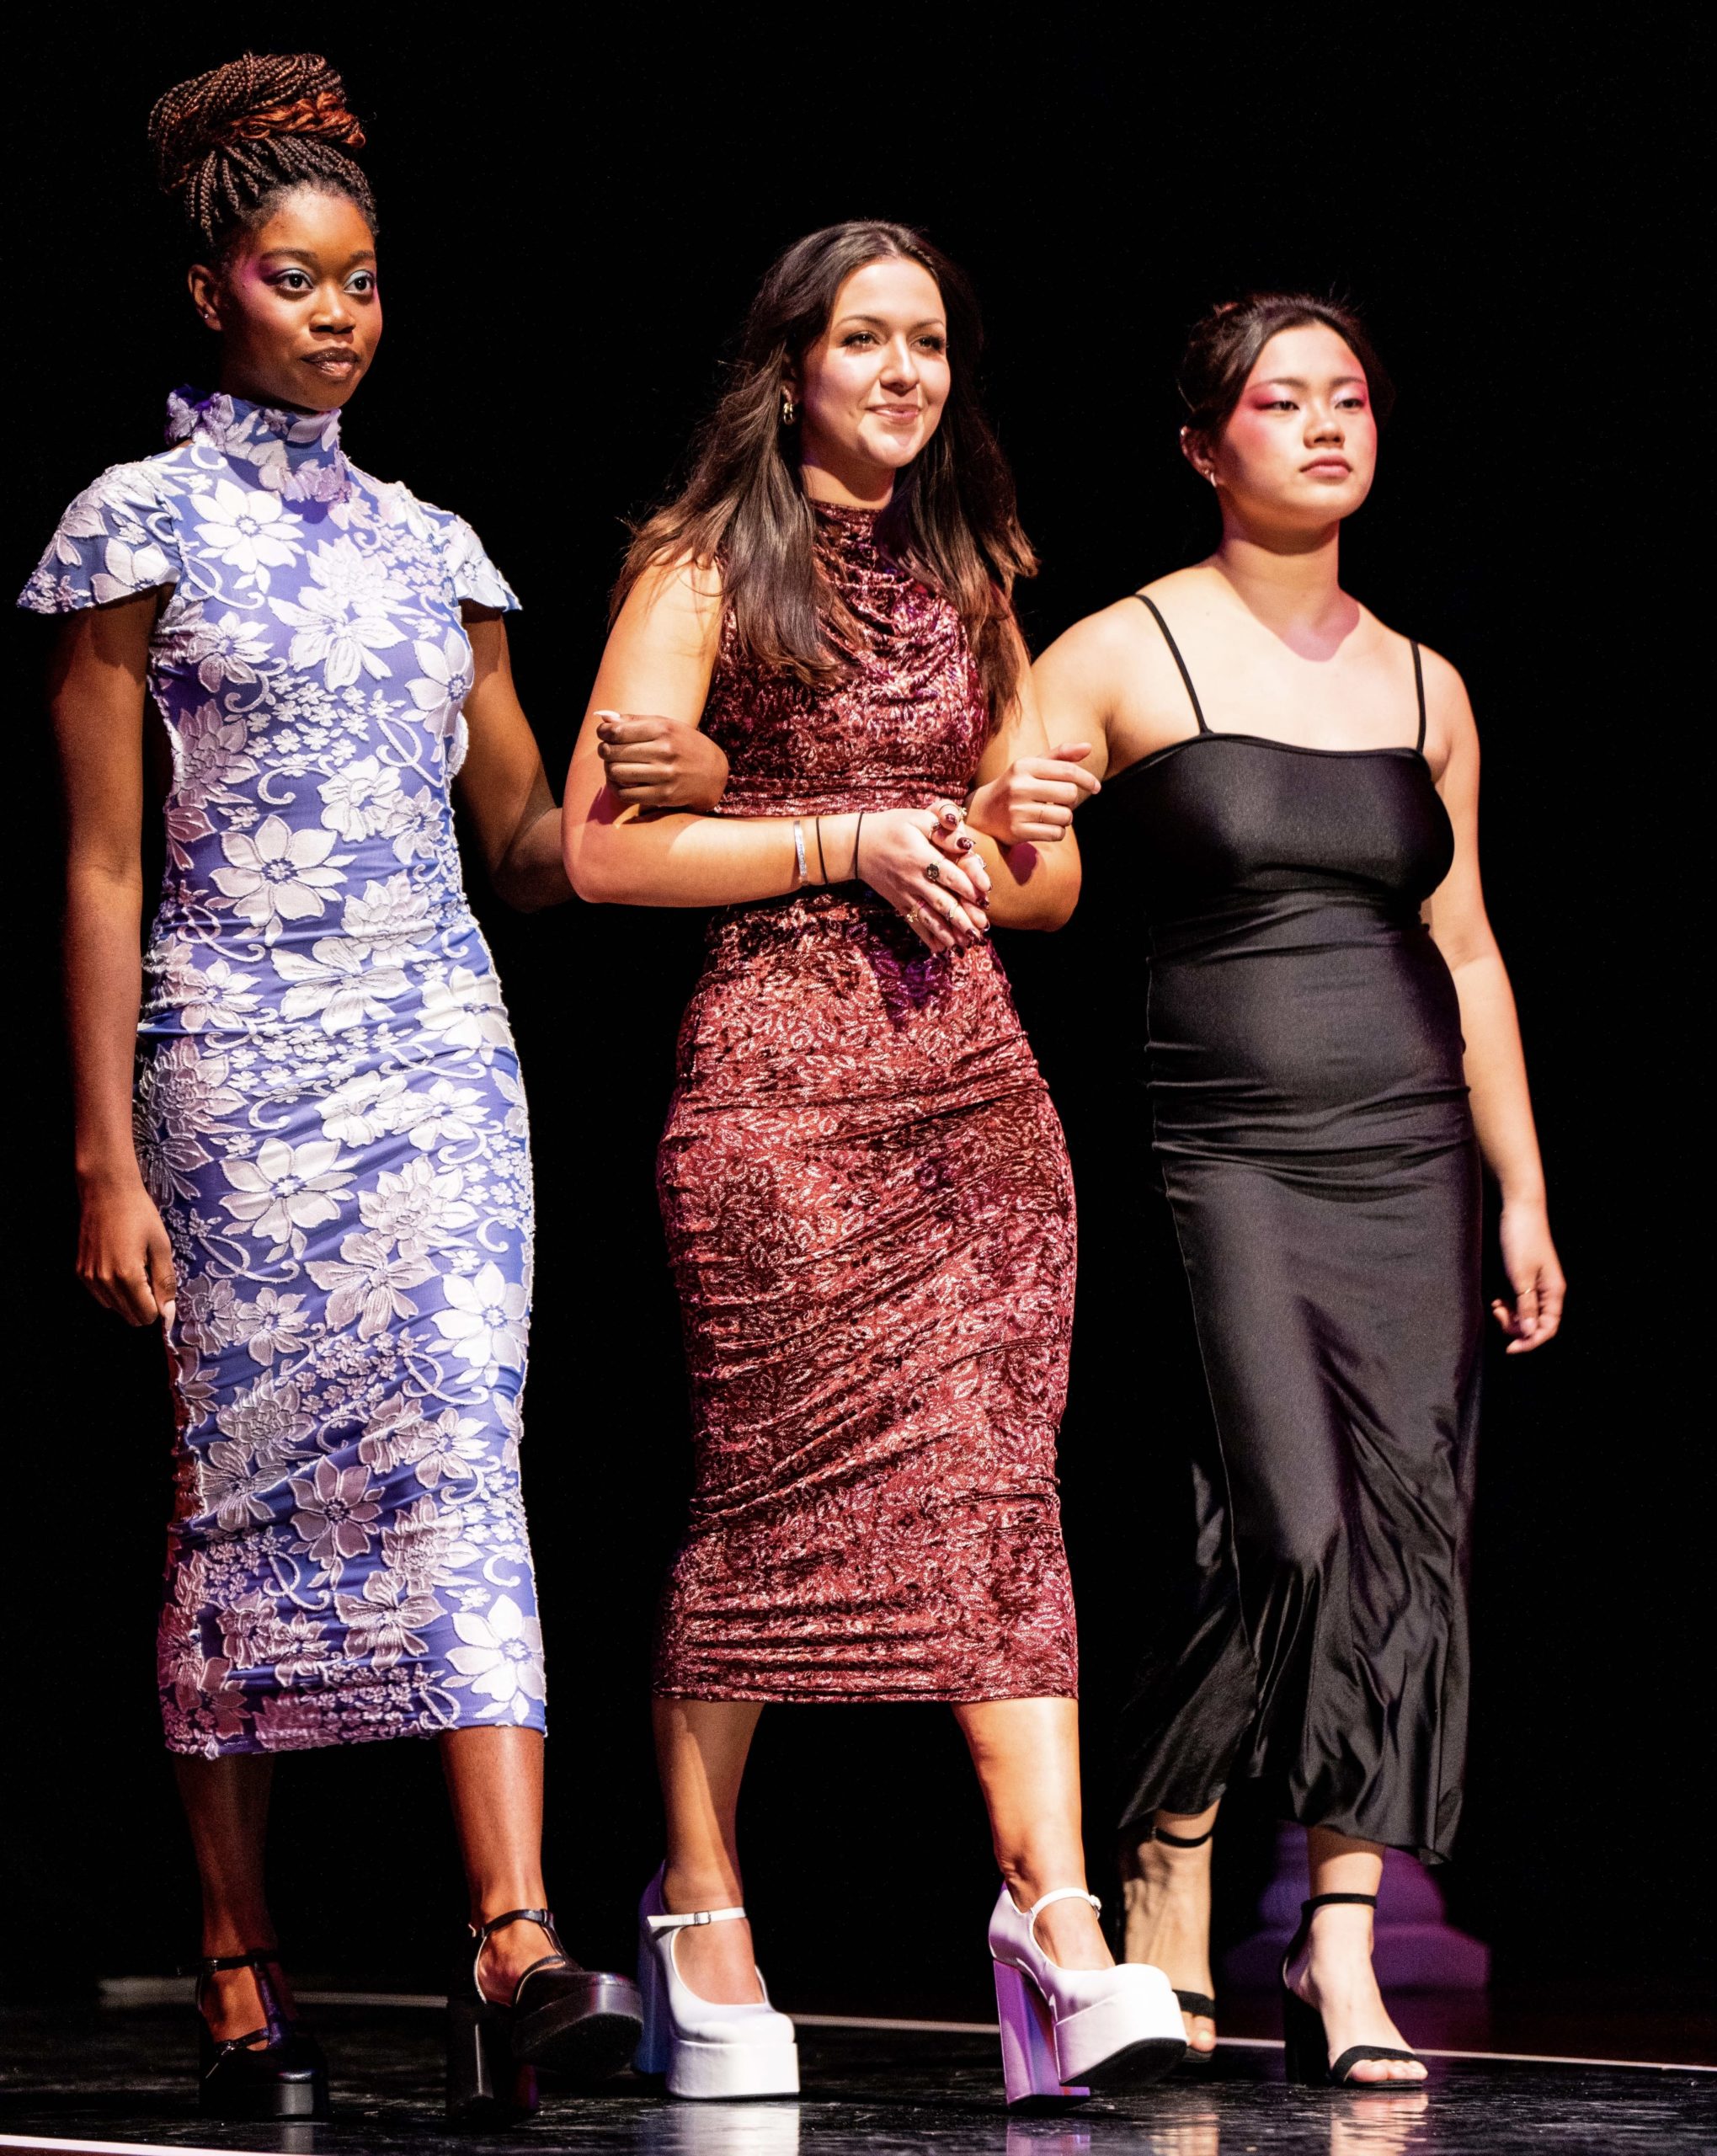 Three young women in intricate dresses walk down the stage arm in arm with each another.